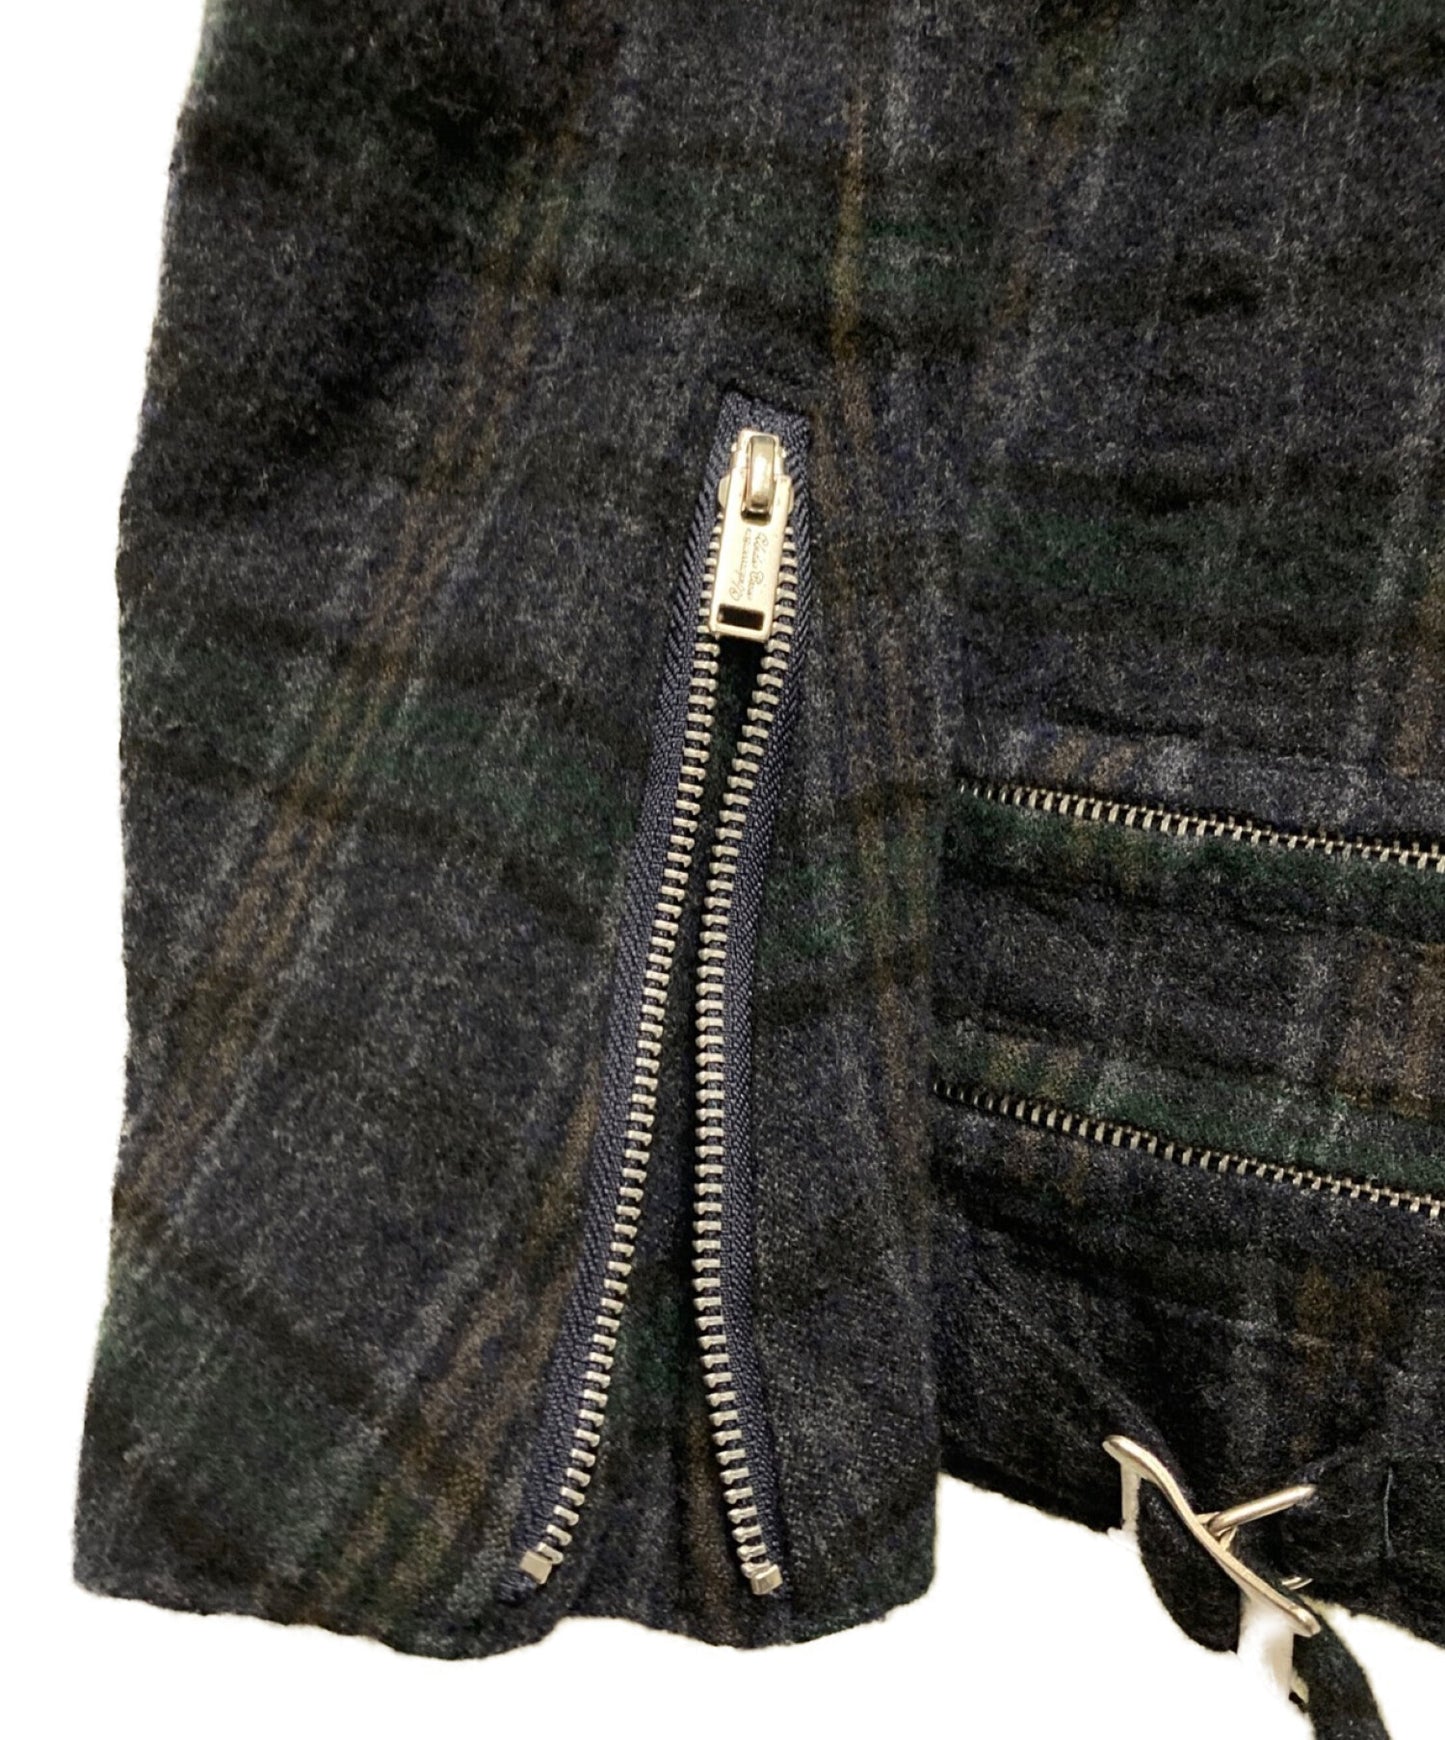 [Pre-owned] UNDERCOVER Shrunken Wool Check Riders Jacket L4202-2